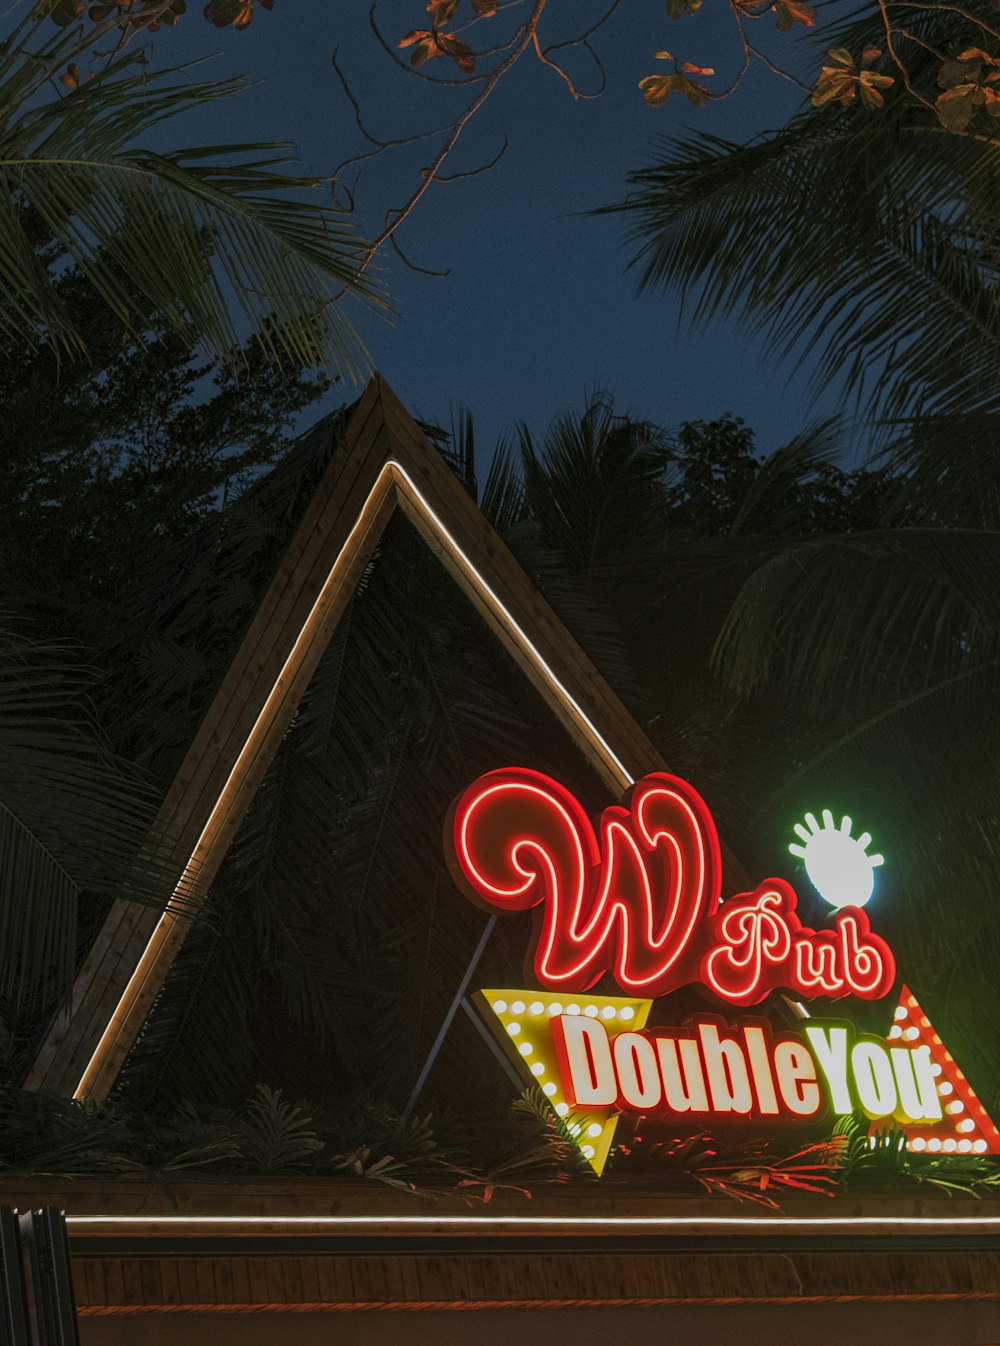 a neon sign is lit up at night